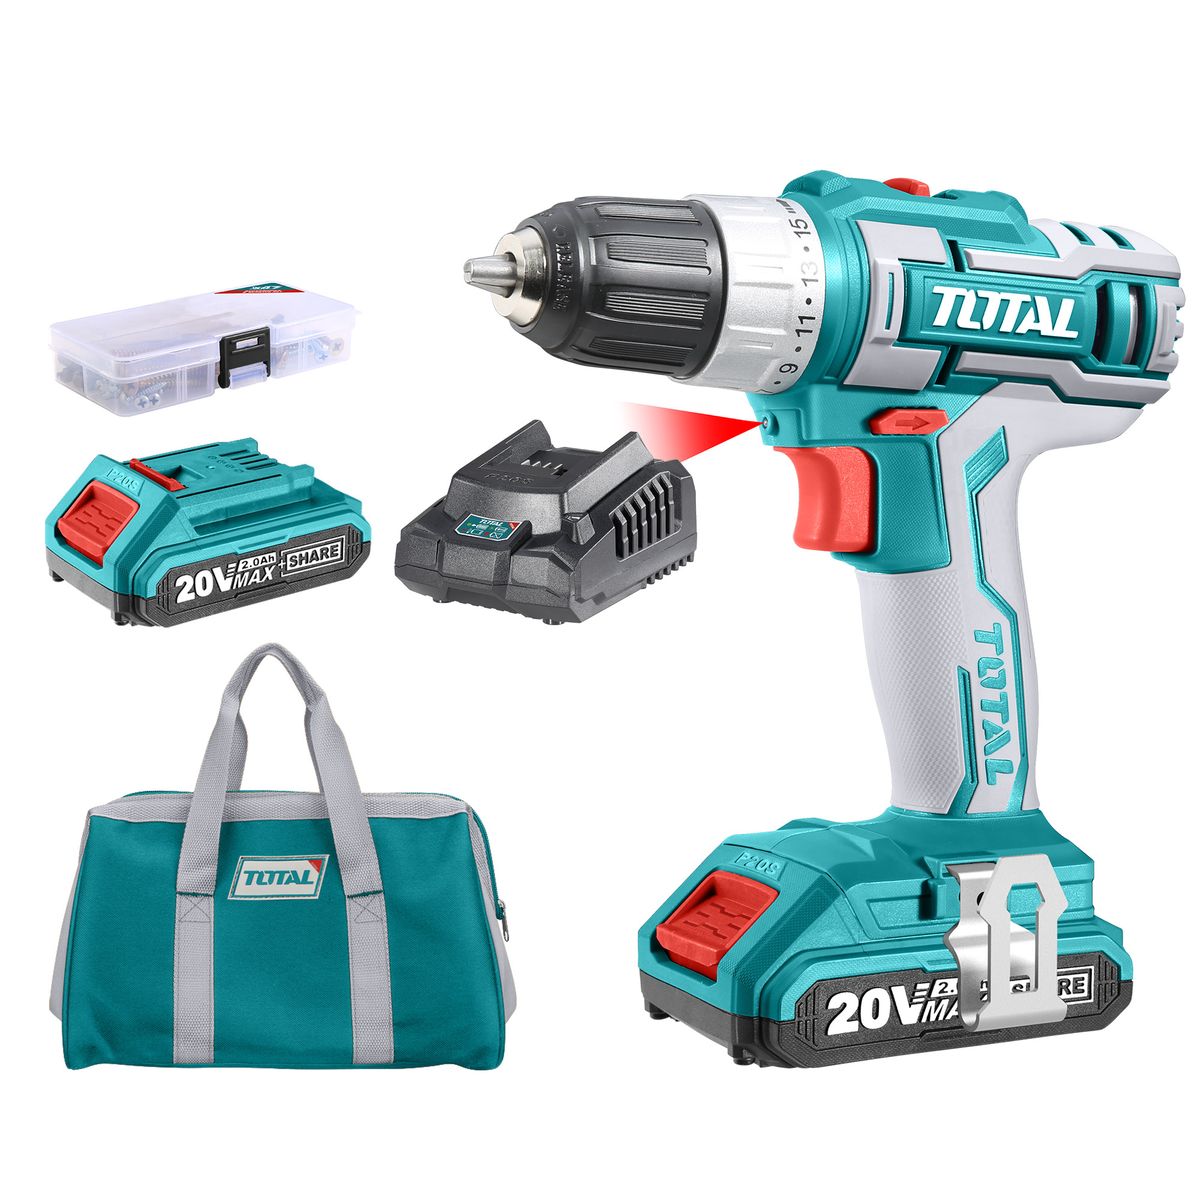 Total Tools 20V Lithium-Ion Cordless Drill with 2 x Battery & 1 x Charger